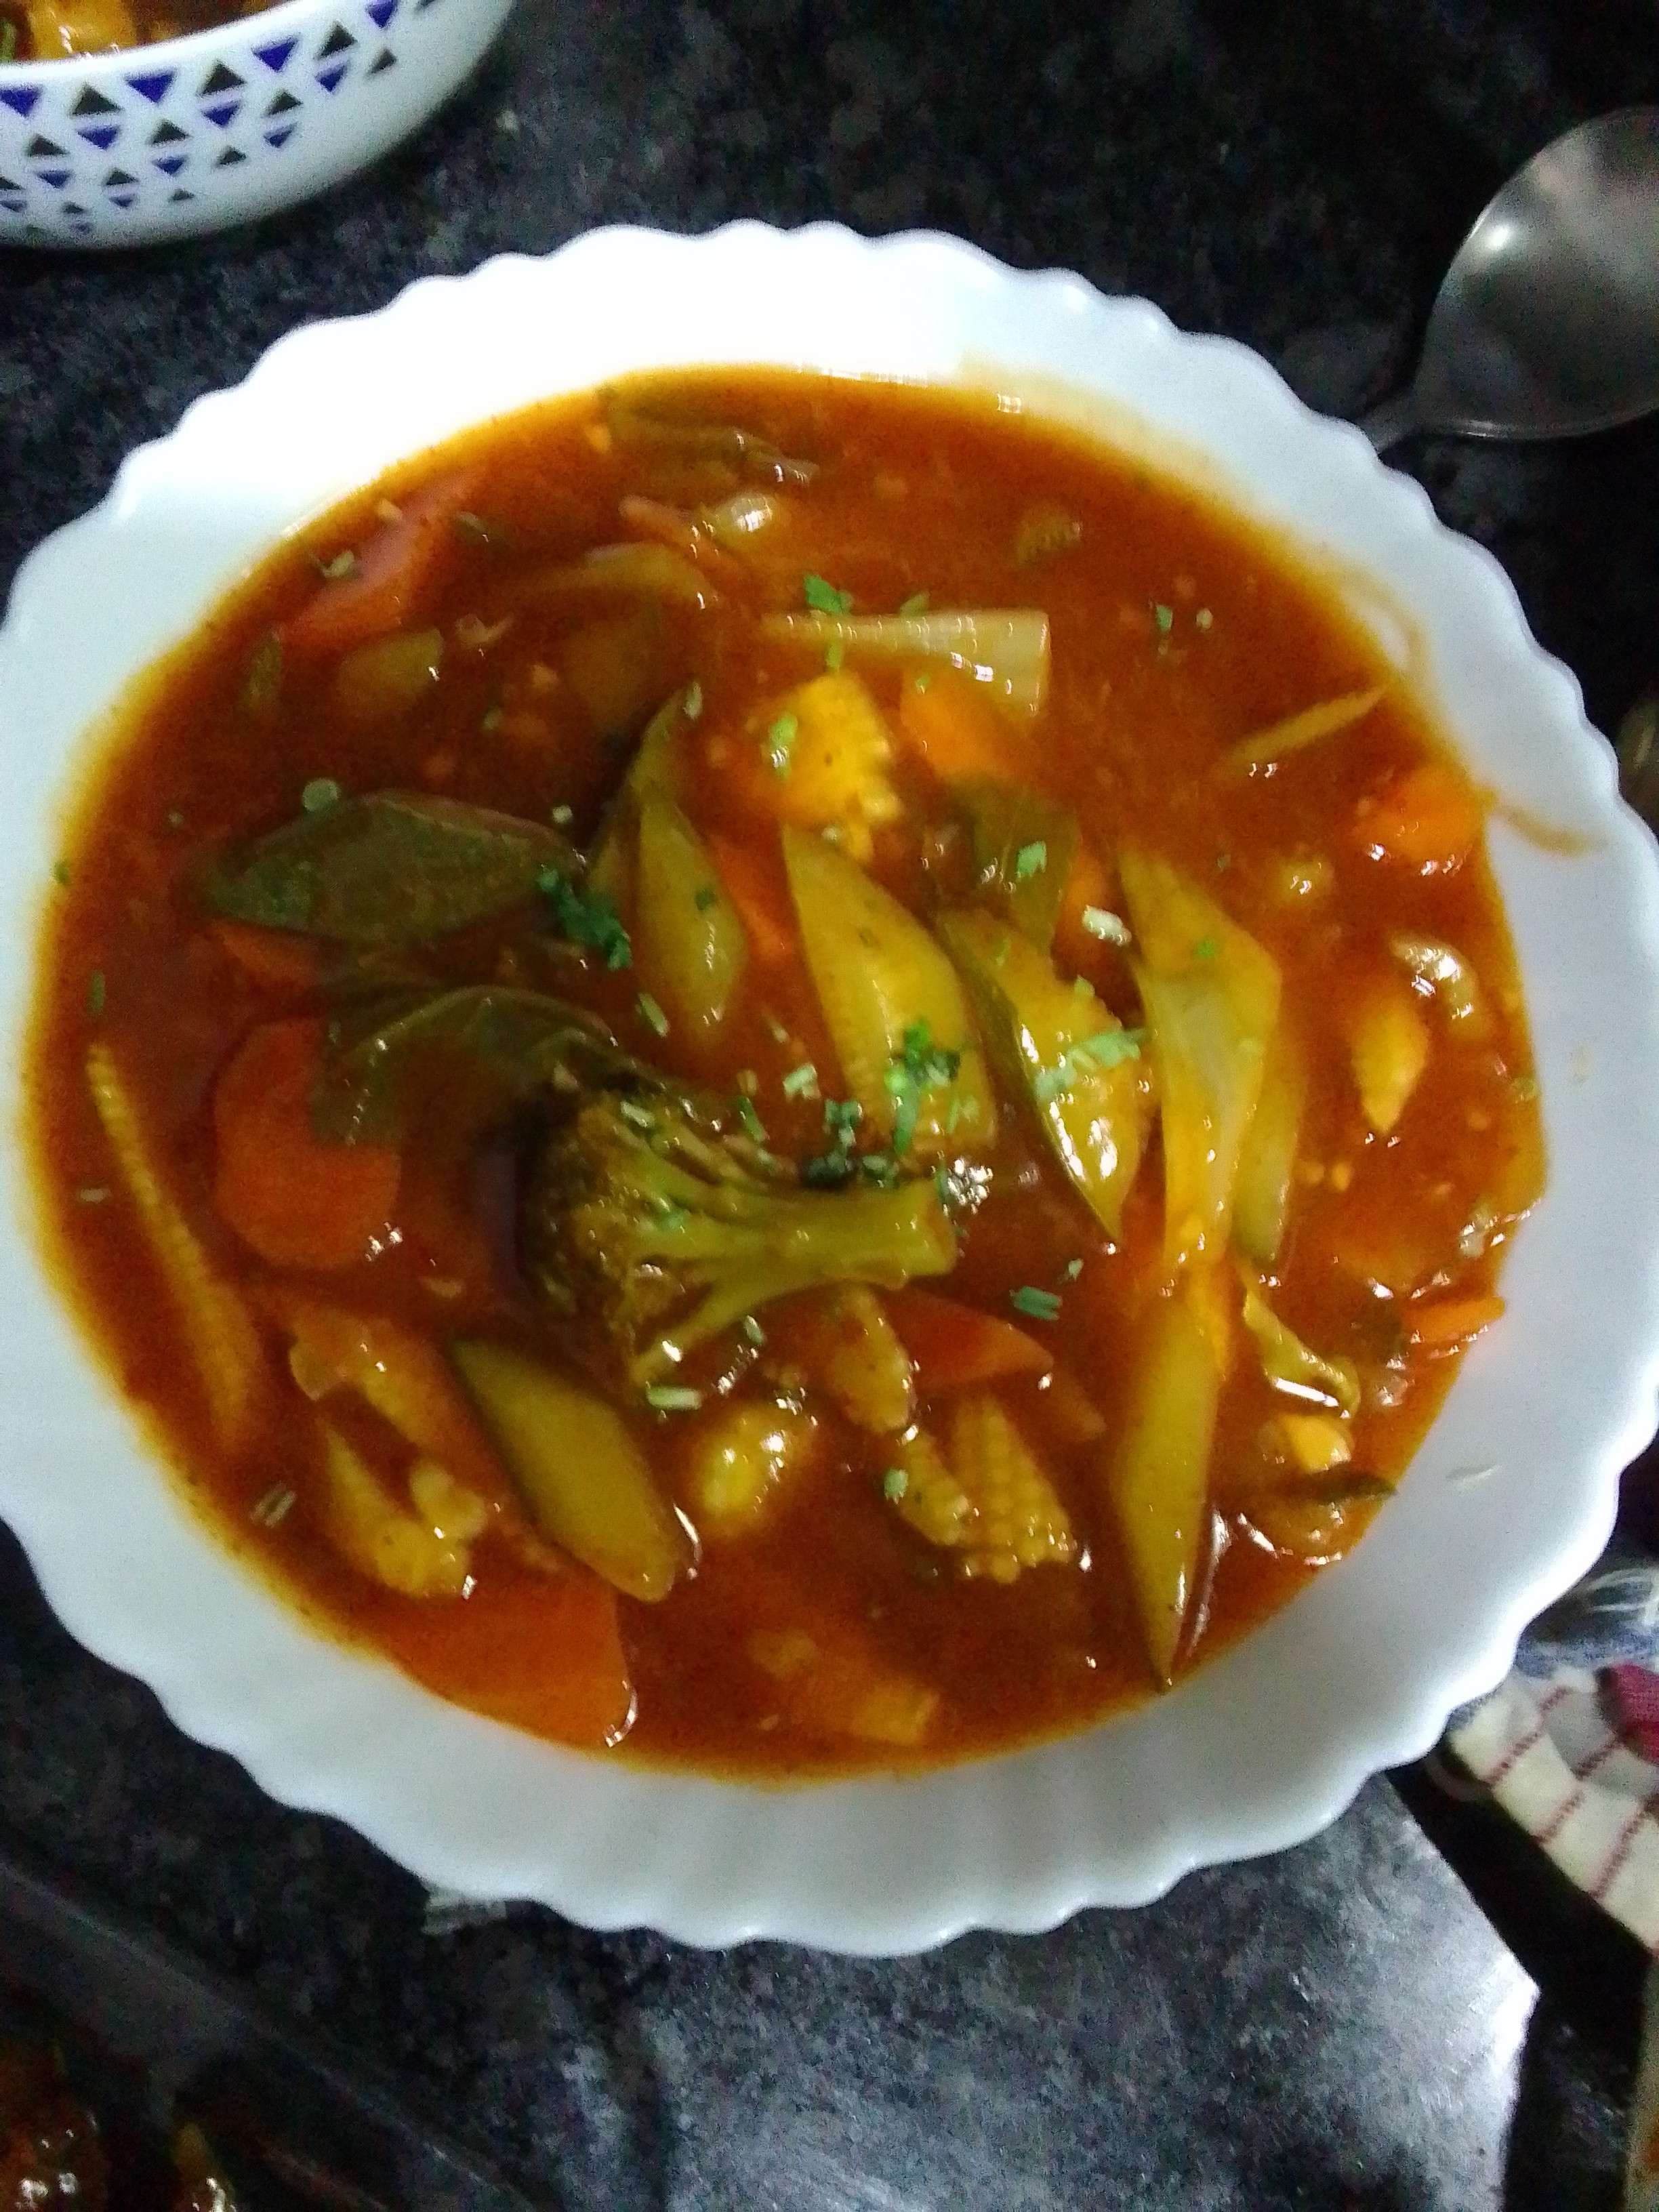 Delicious Mix Veg in Hot Garlic Sauce prepared by COOX